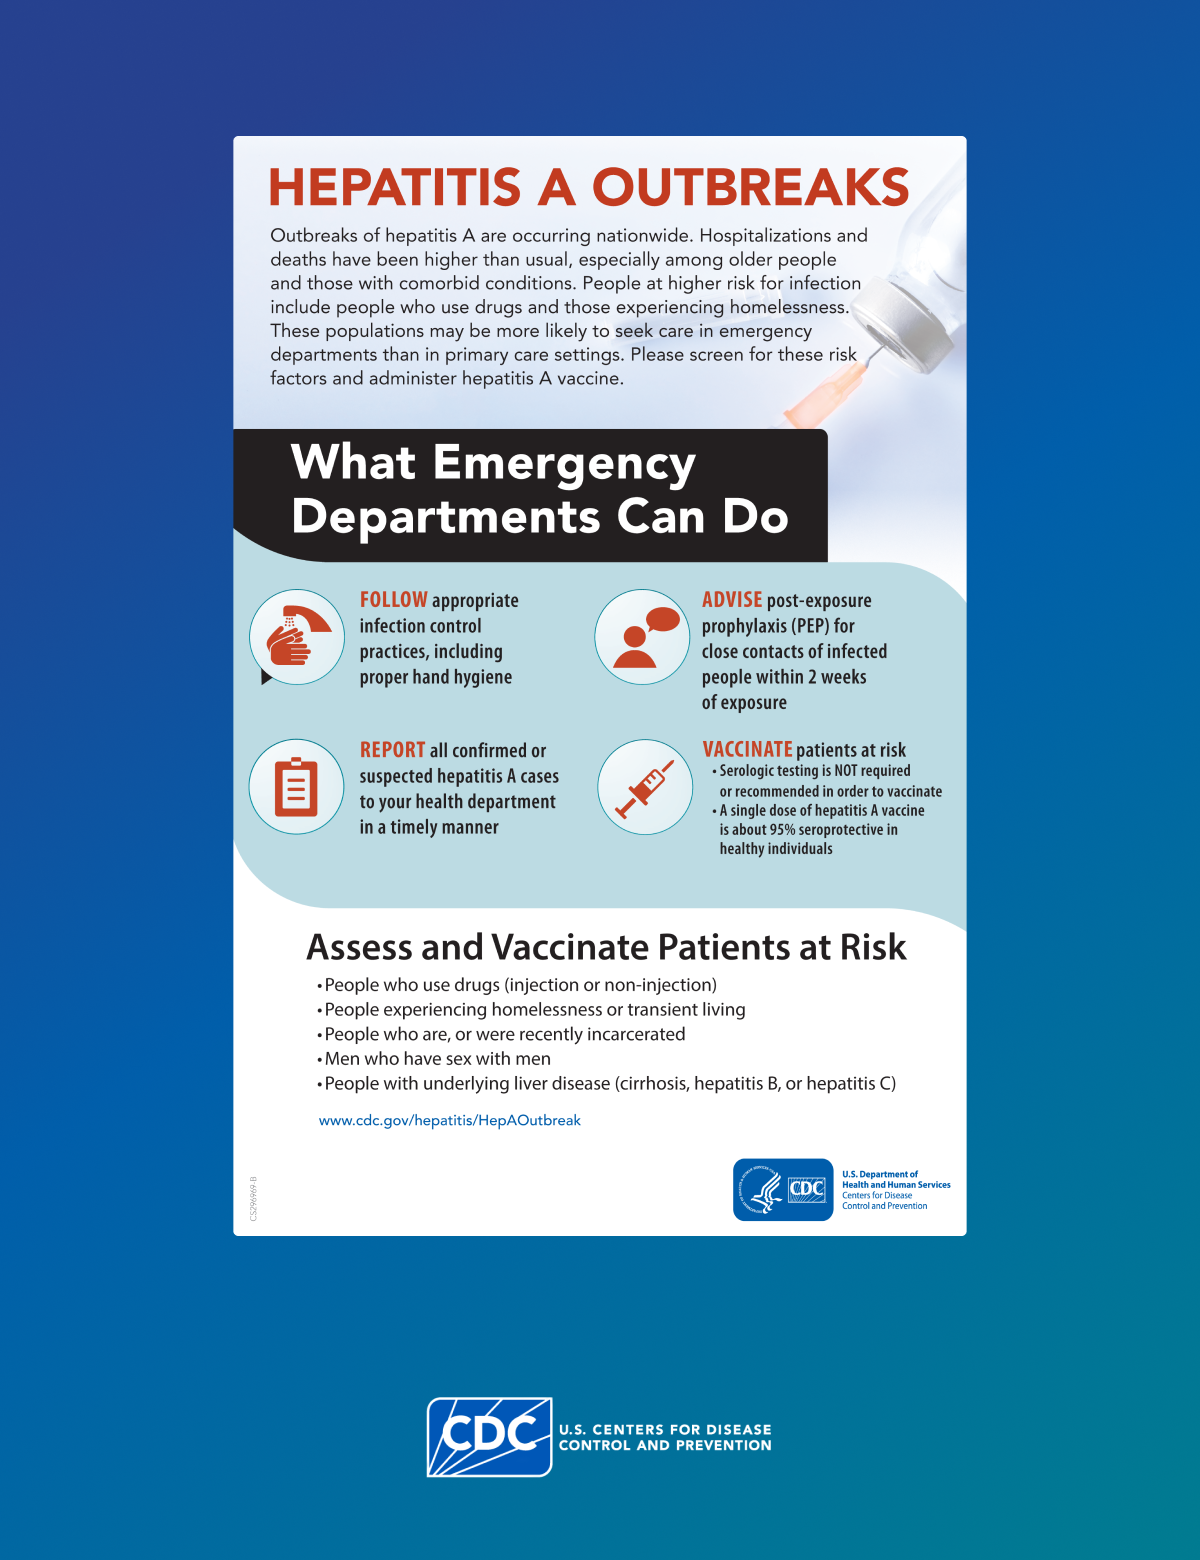 Fact sheet for emergency departments to refer to during a hepatitis A outbreak